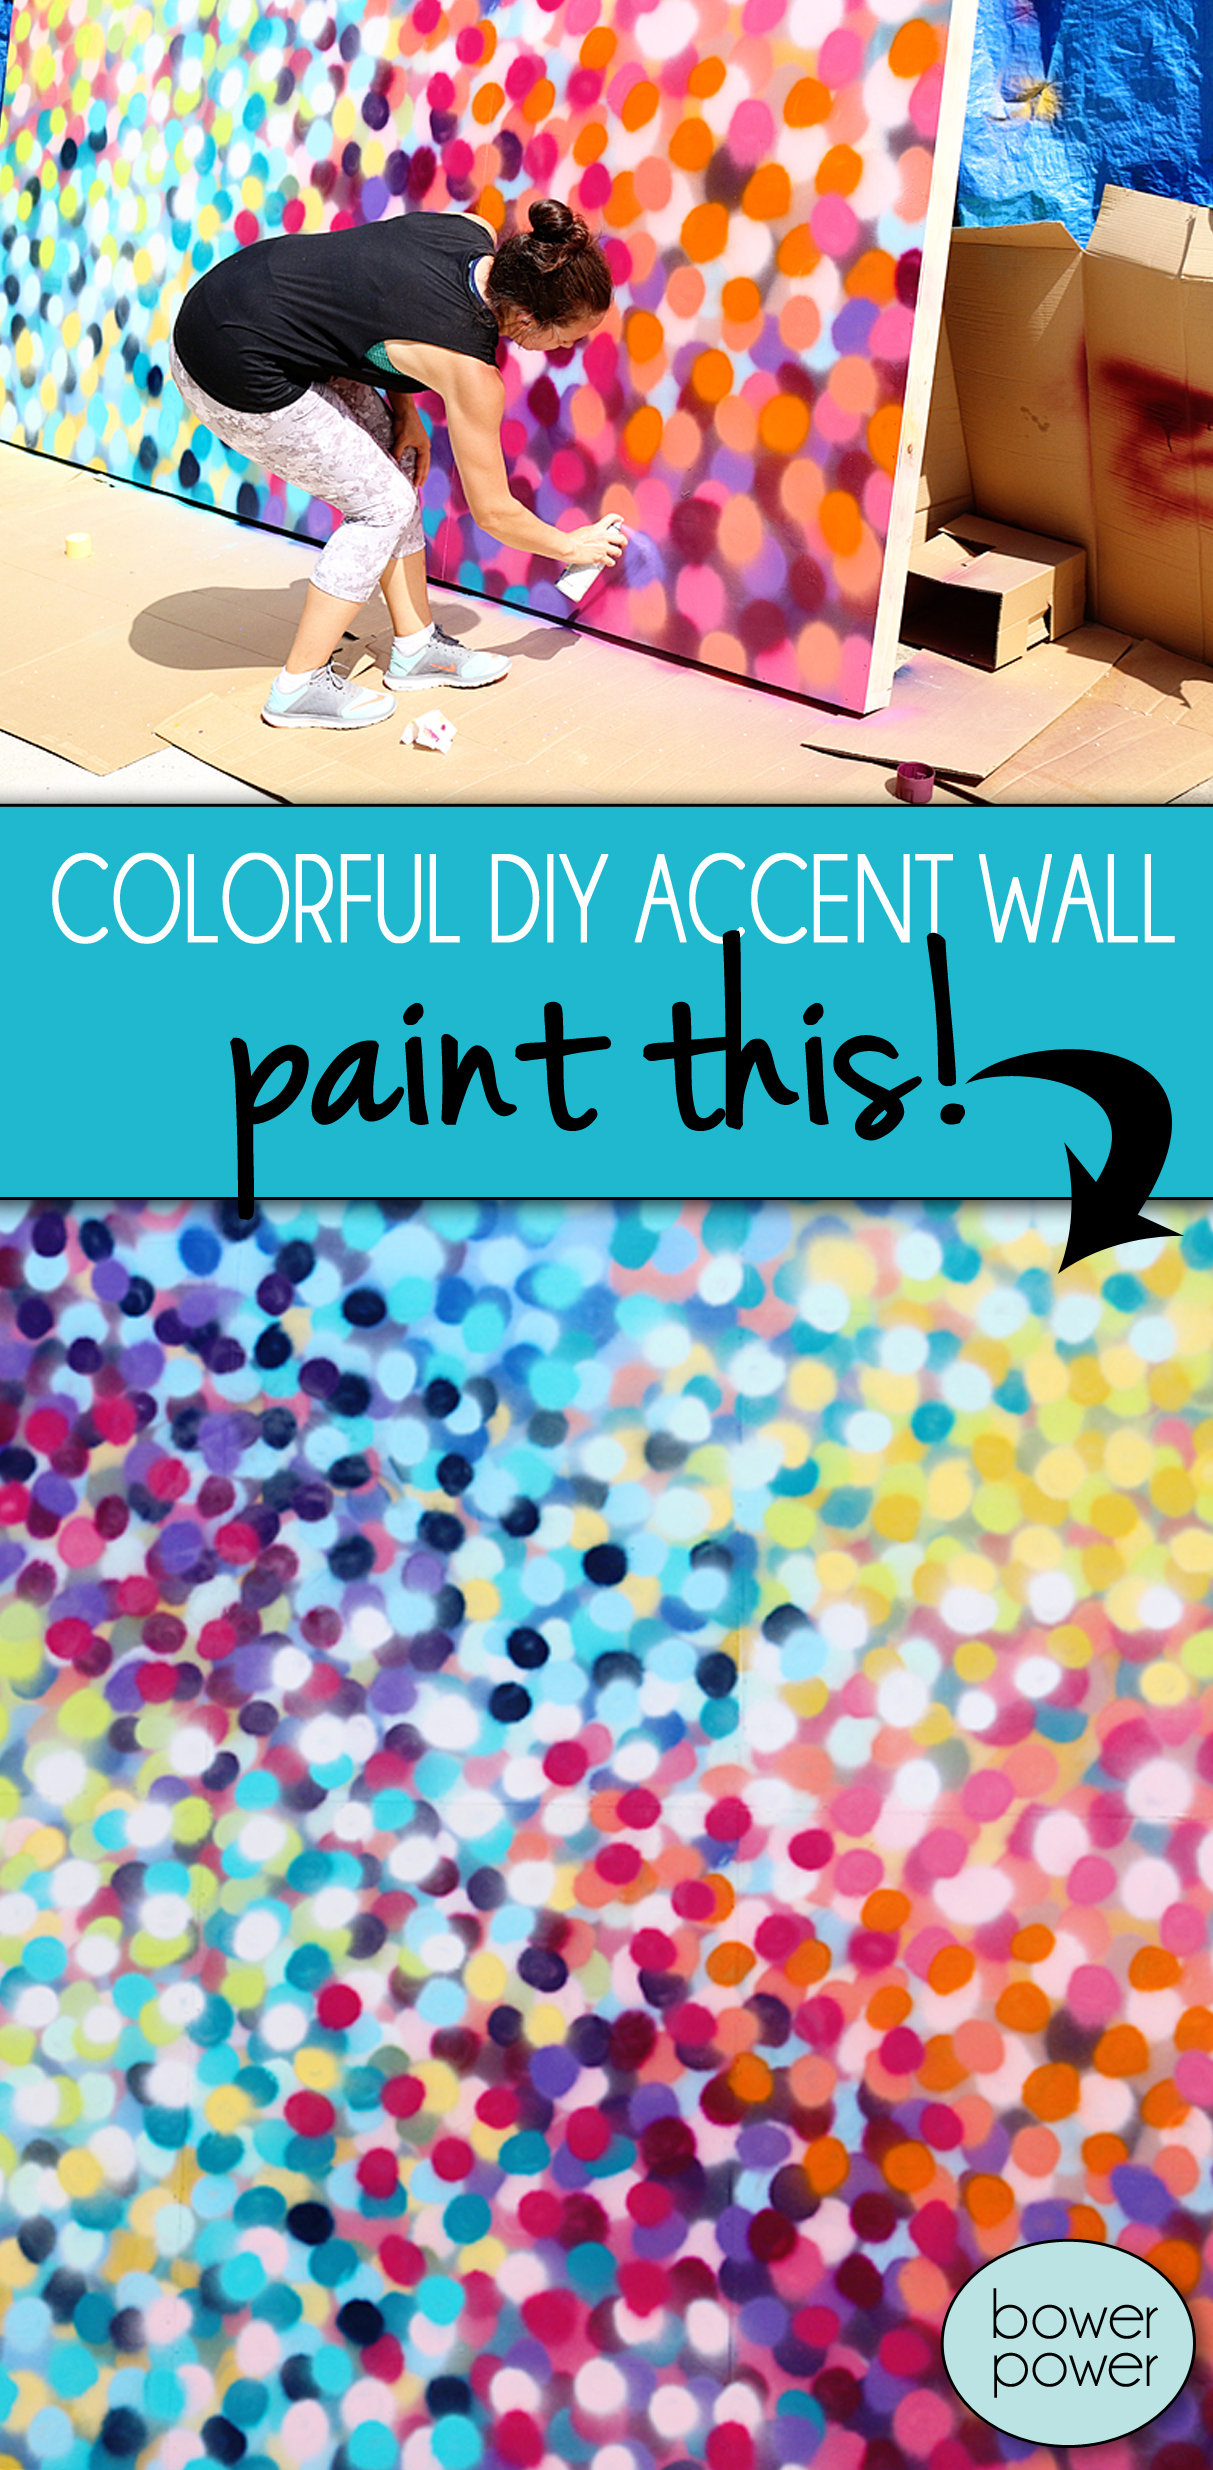 Colorful accent wall - Bower Power